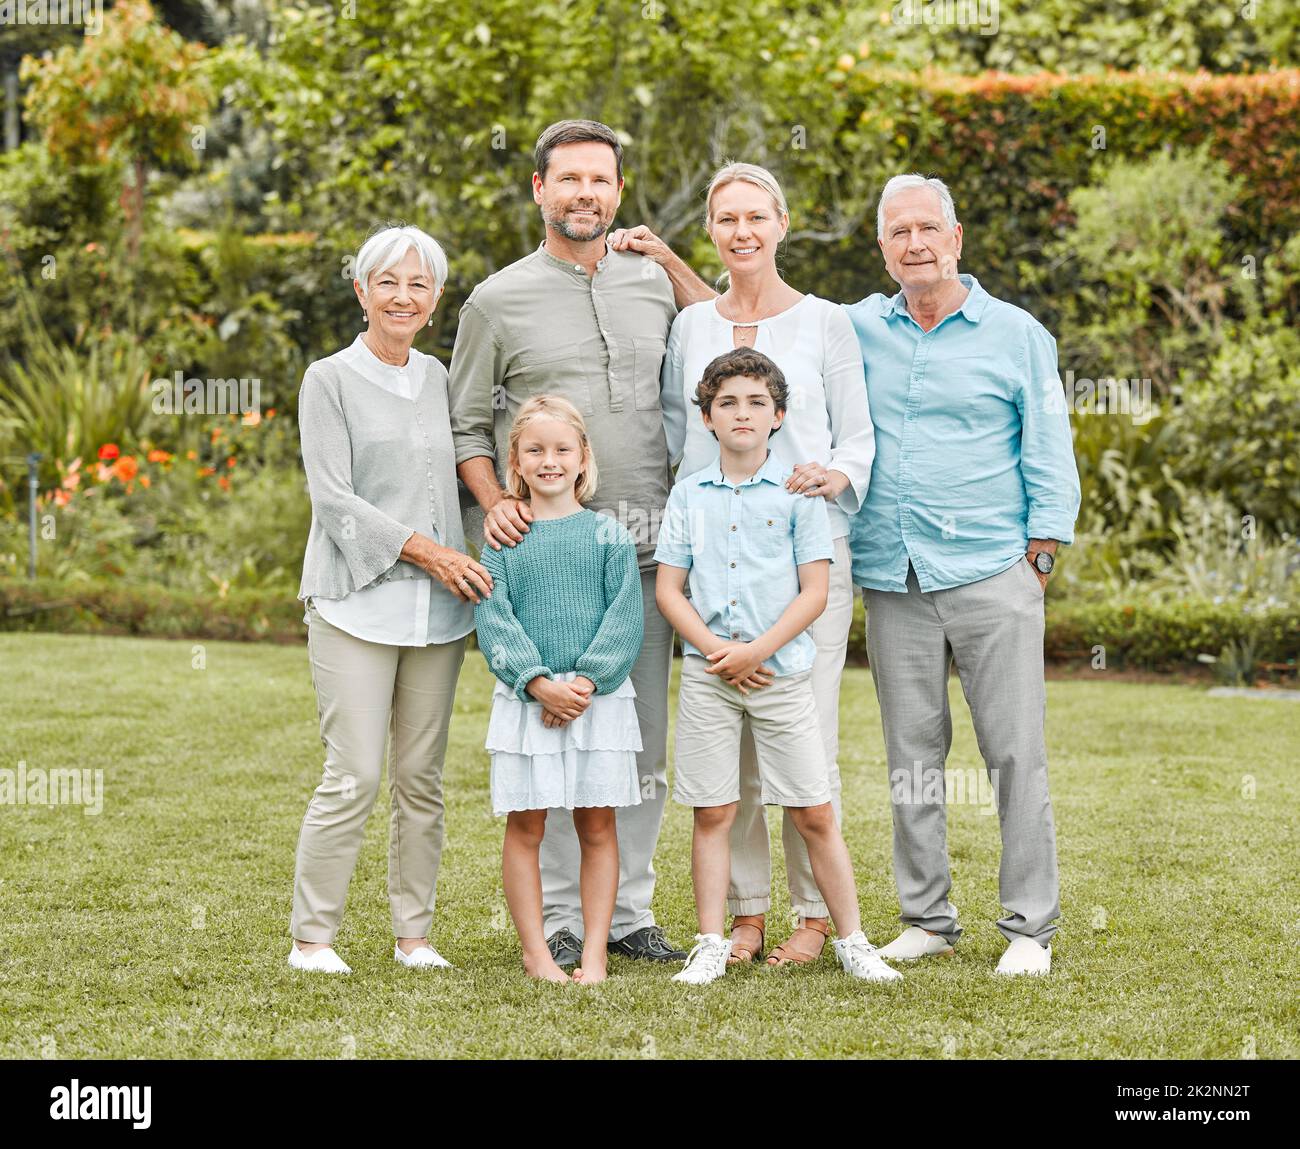 How lucky we are to have each other. Shot of a multi-generational family standing together outside. Stock Photo